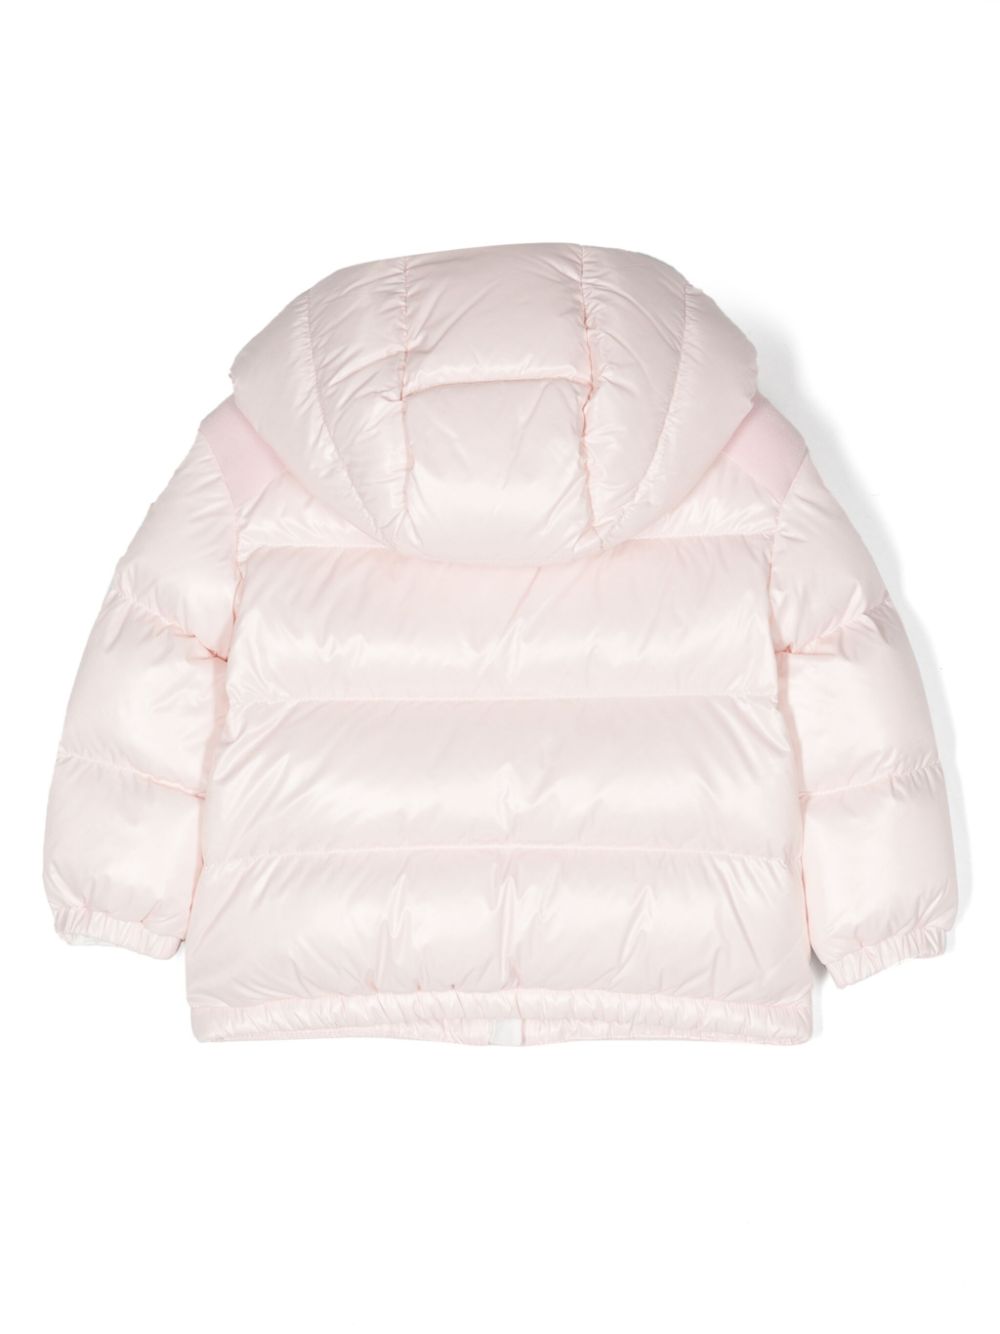 Valya jacket for baby girls in light pink